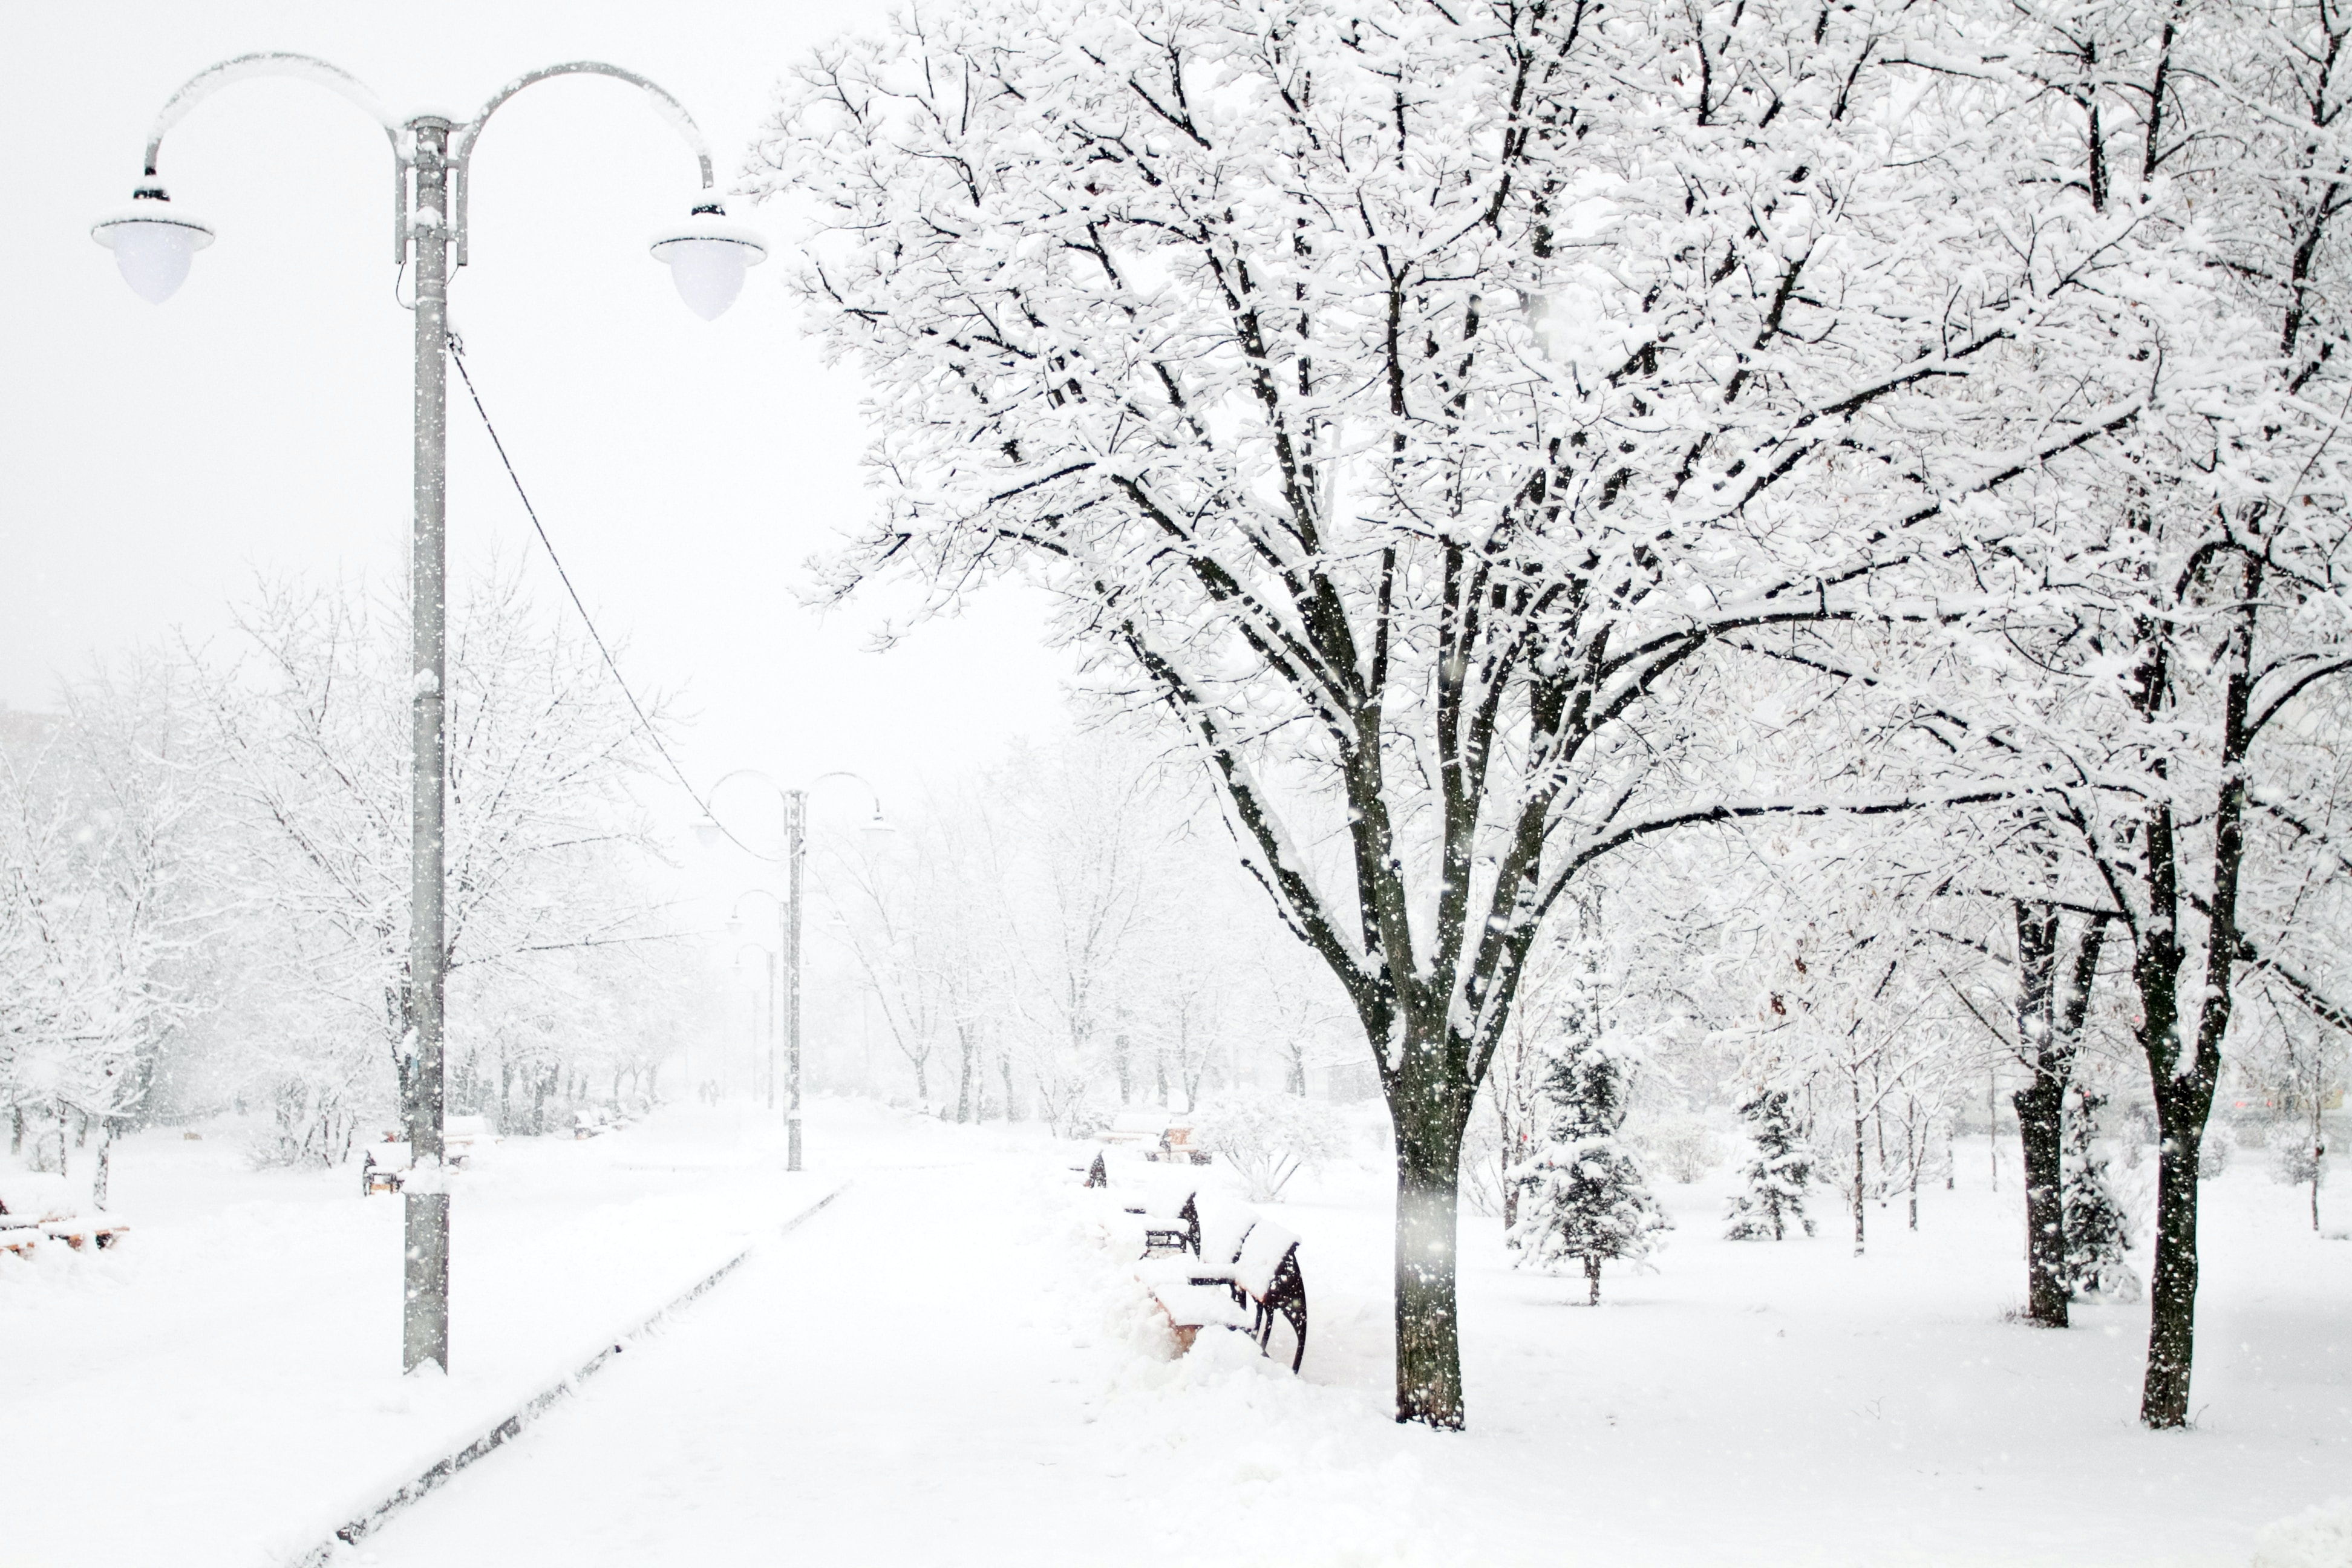 Will Montreal have a white Christmas this year?